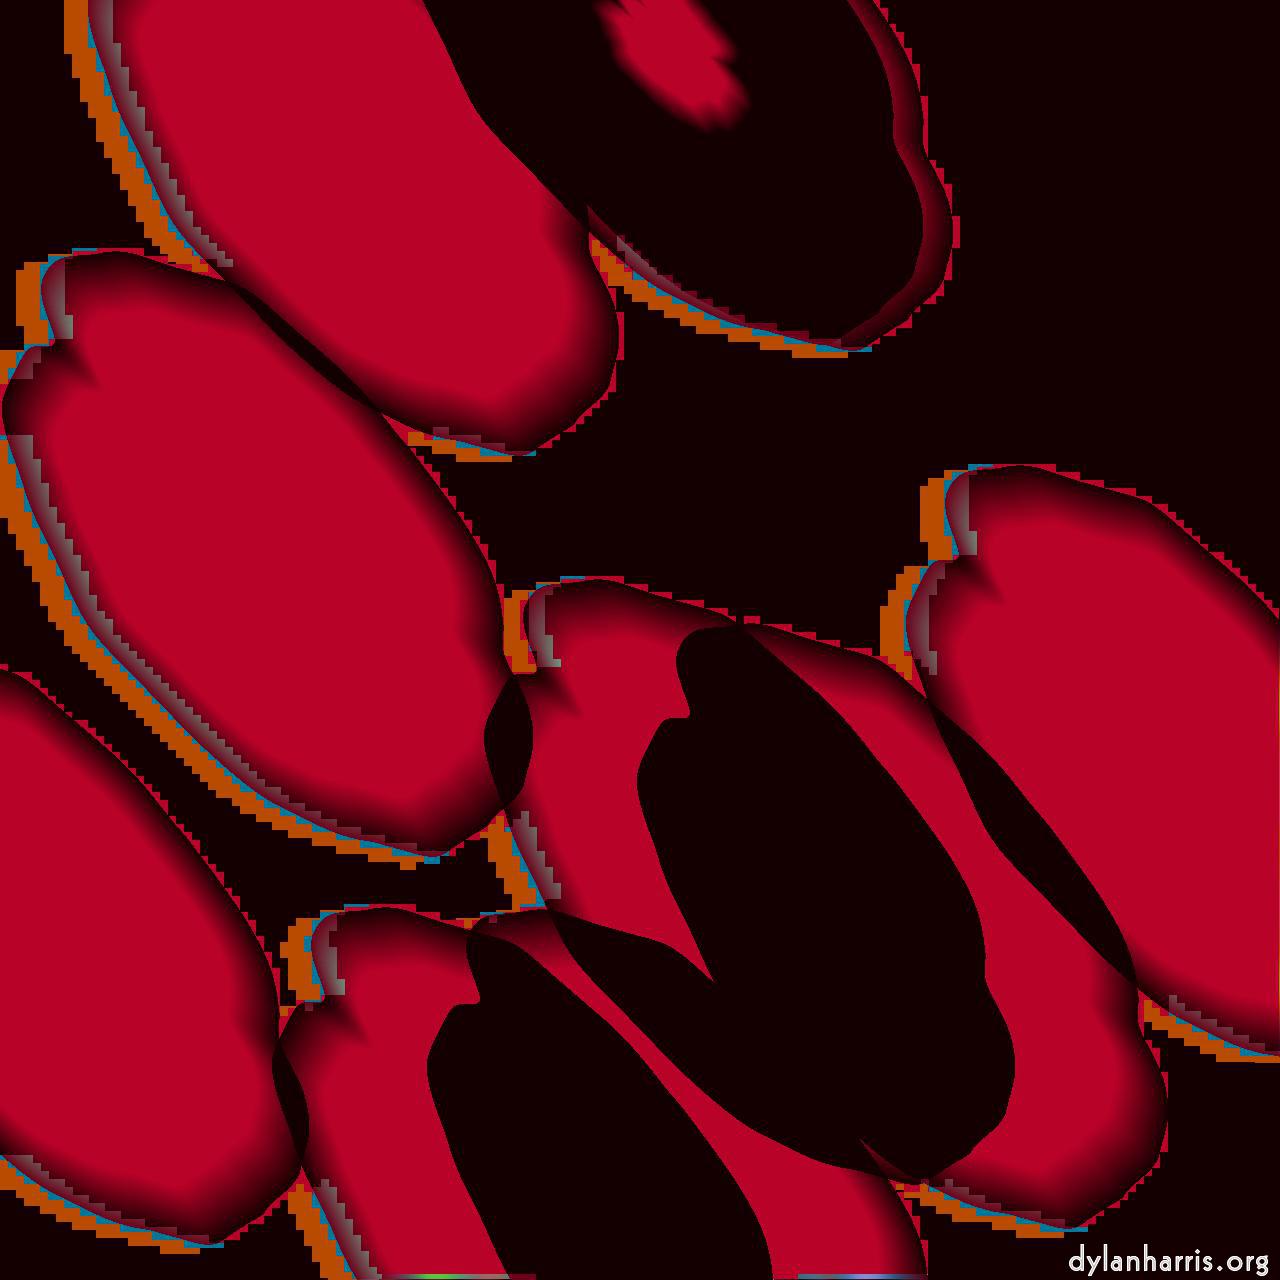 image: variations 1 :: red lumps